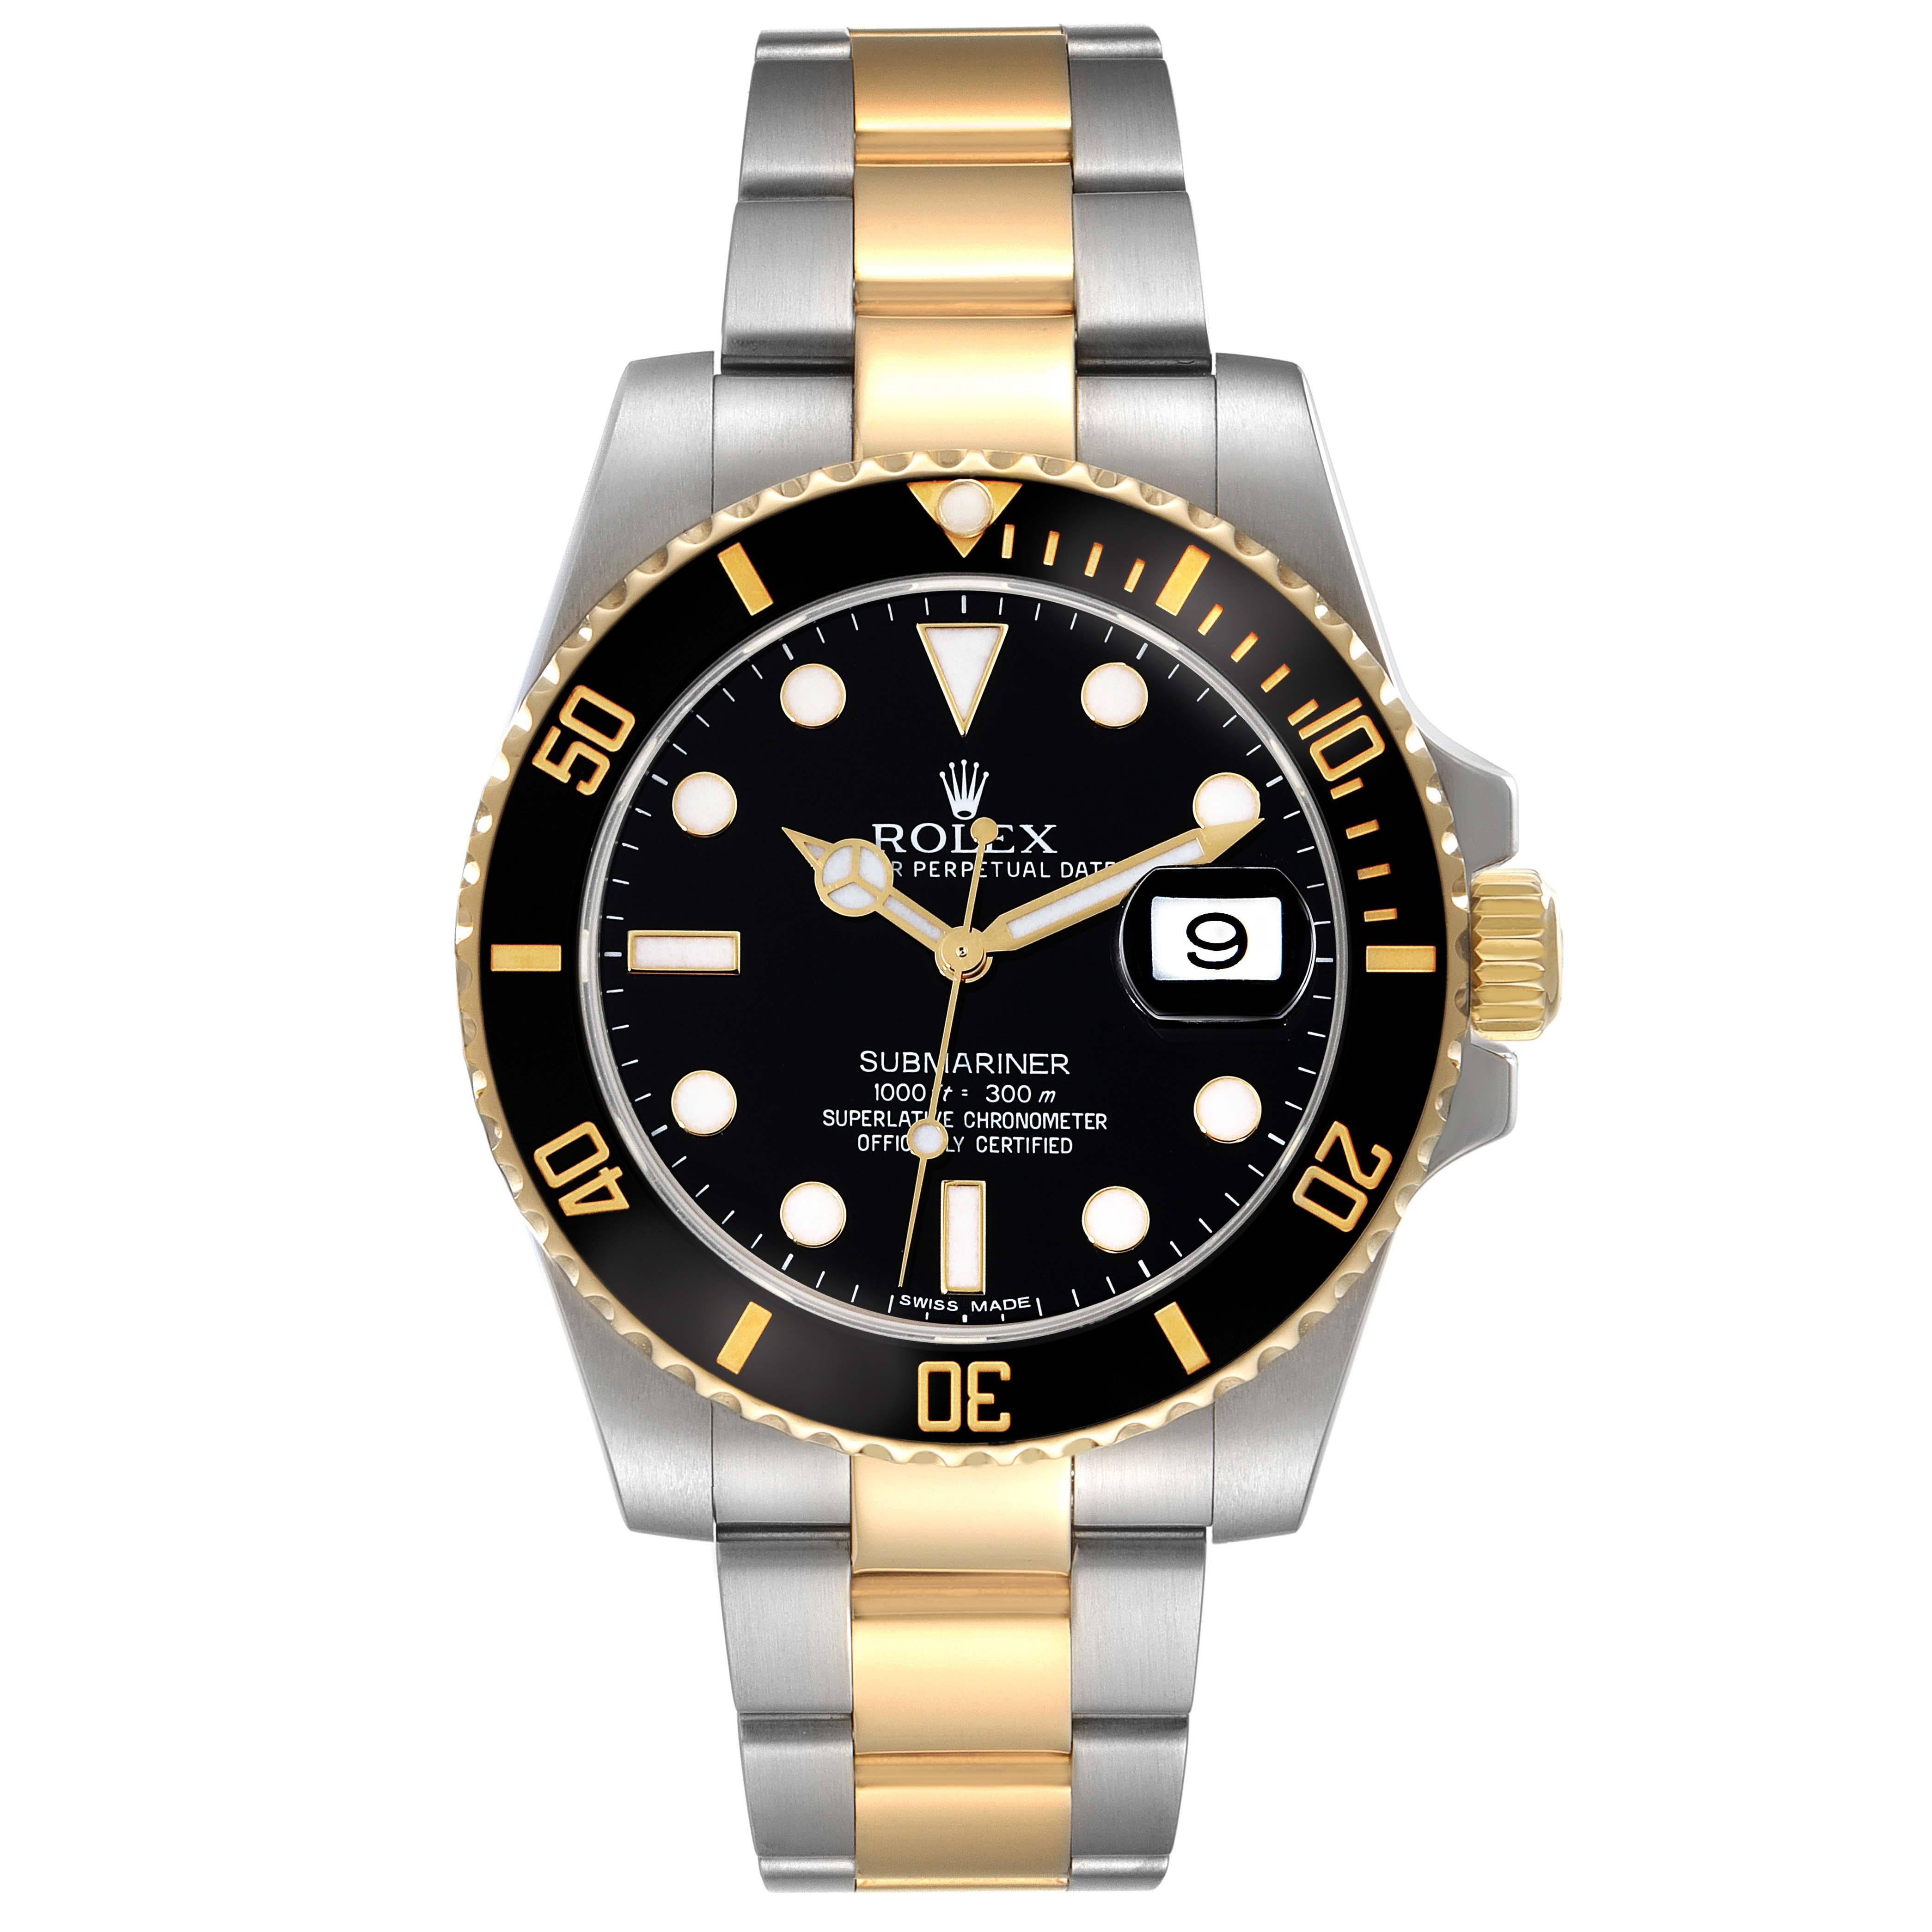 Rolex Submariner Steel Yellow Gold Black Dial Mens Watch 116613 Box Card 4